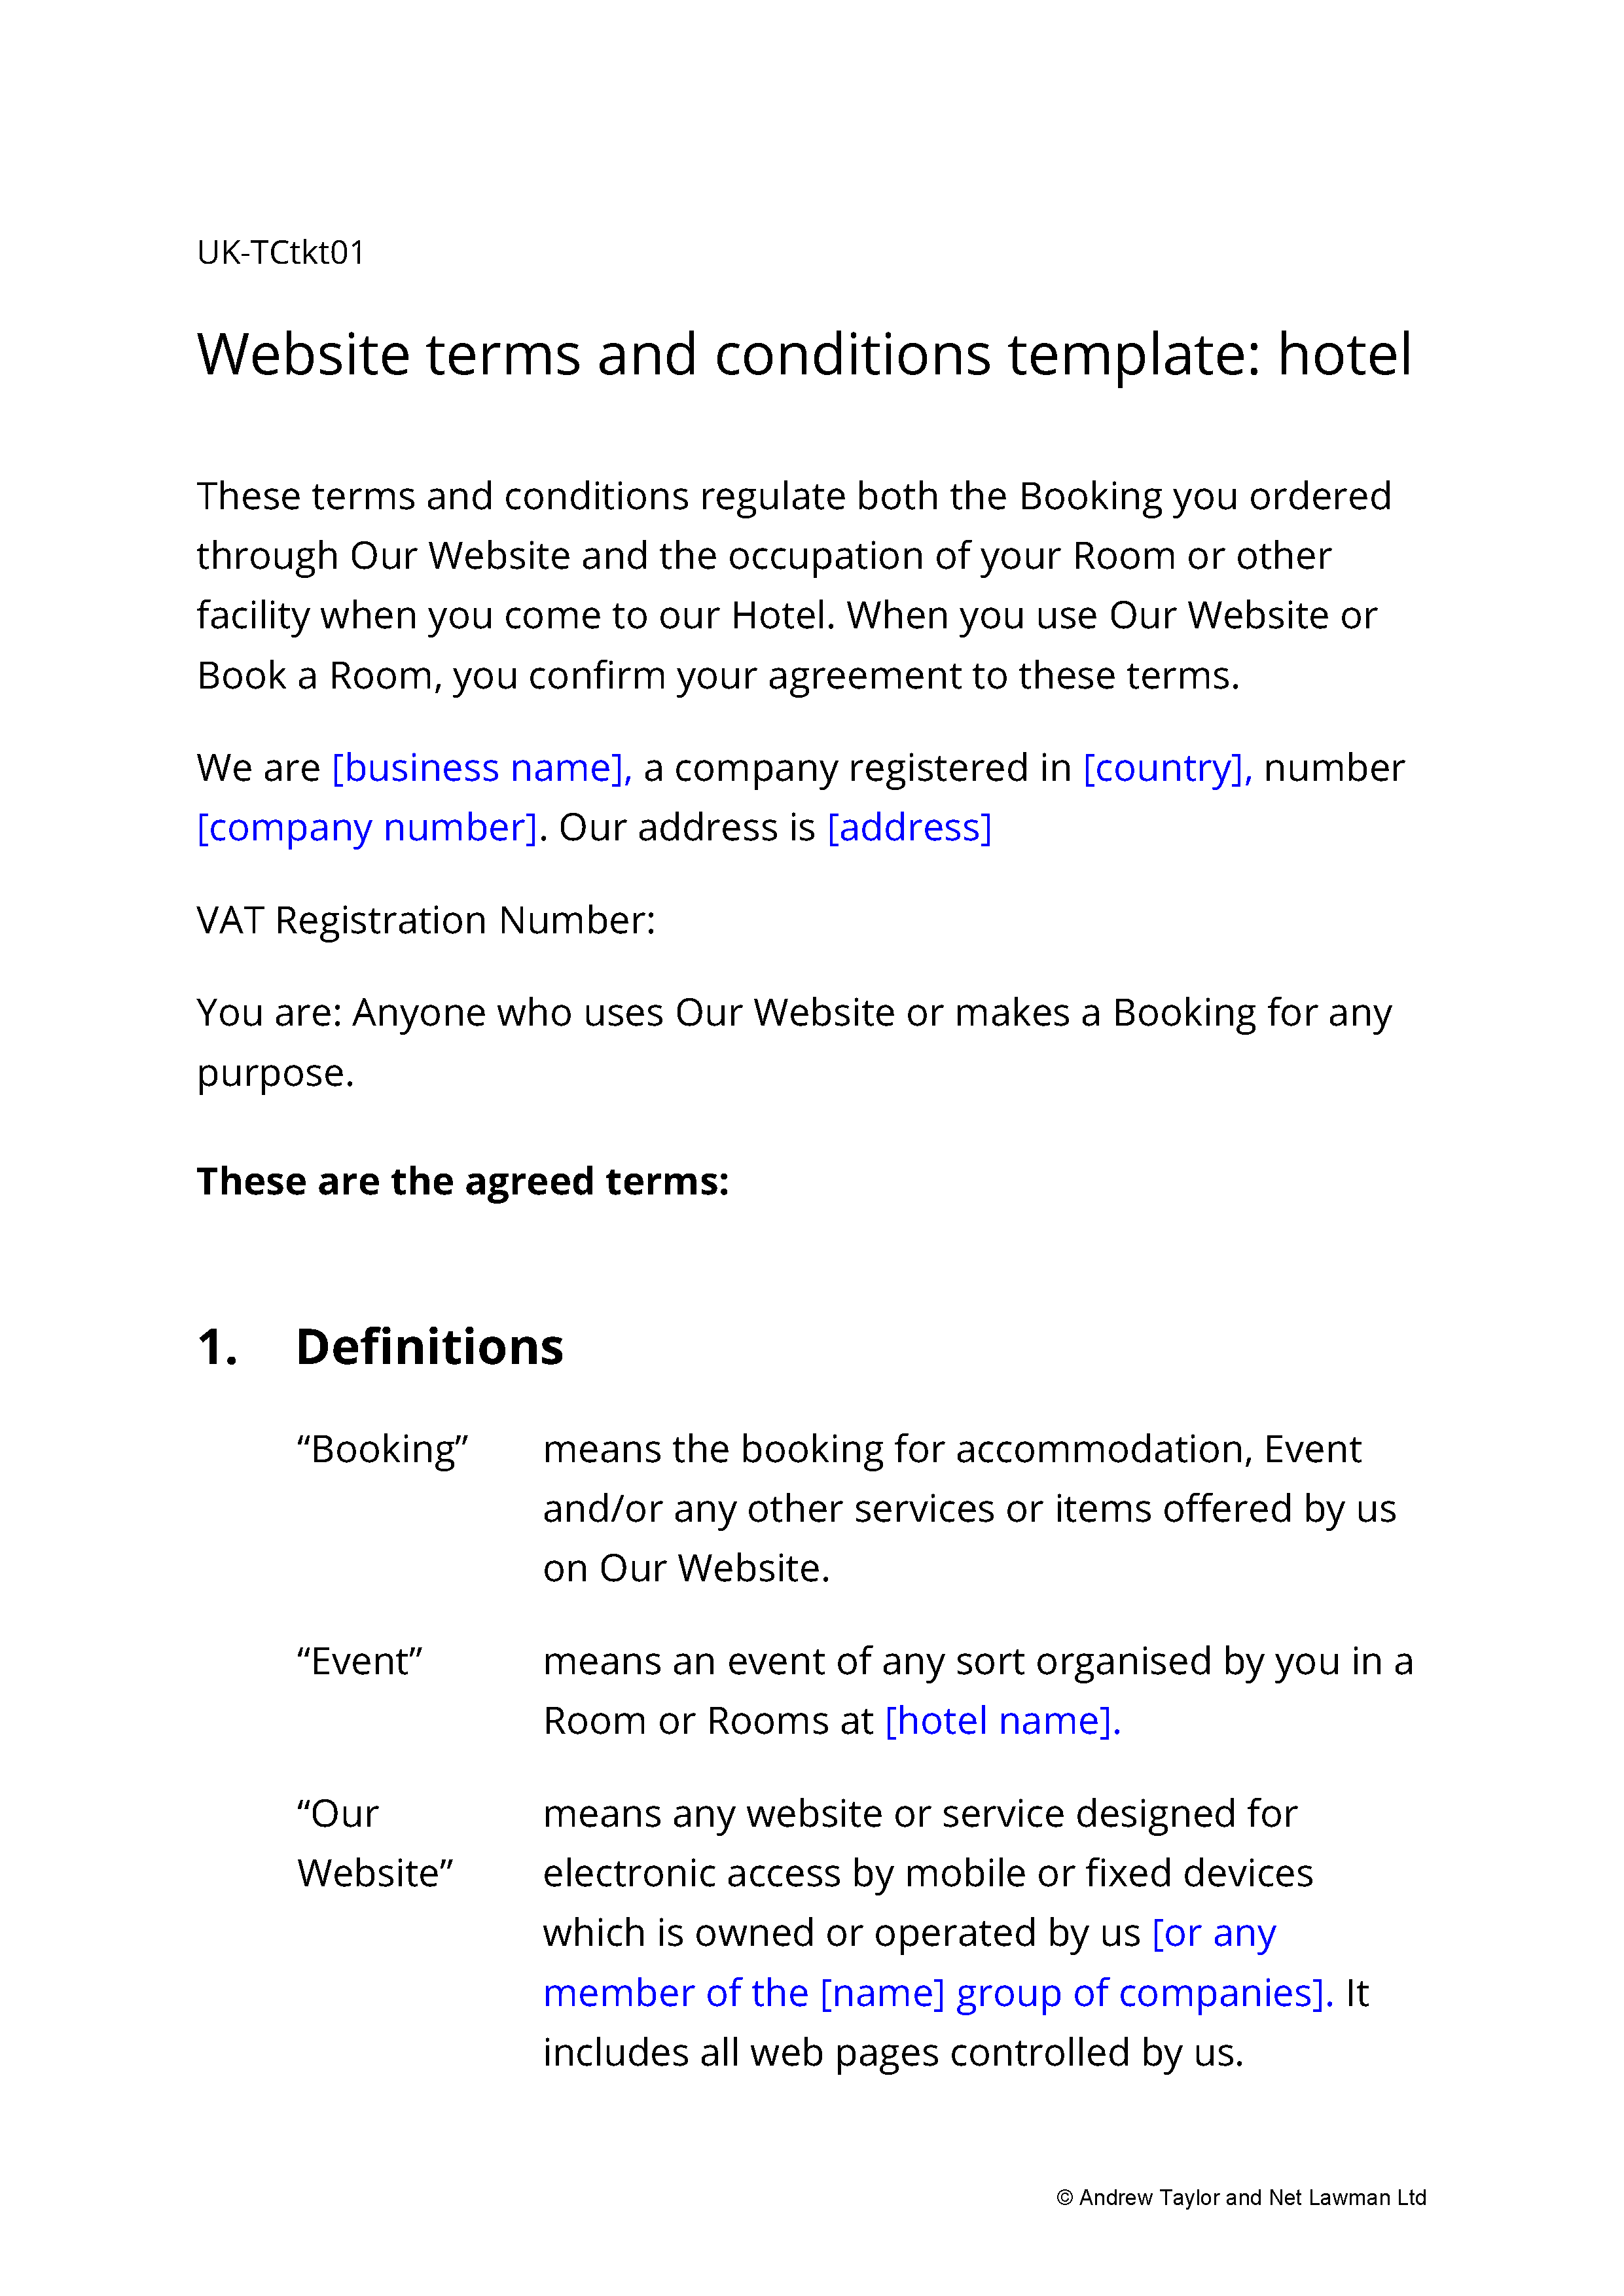 Sample page from the website terms for a hotel